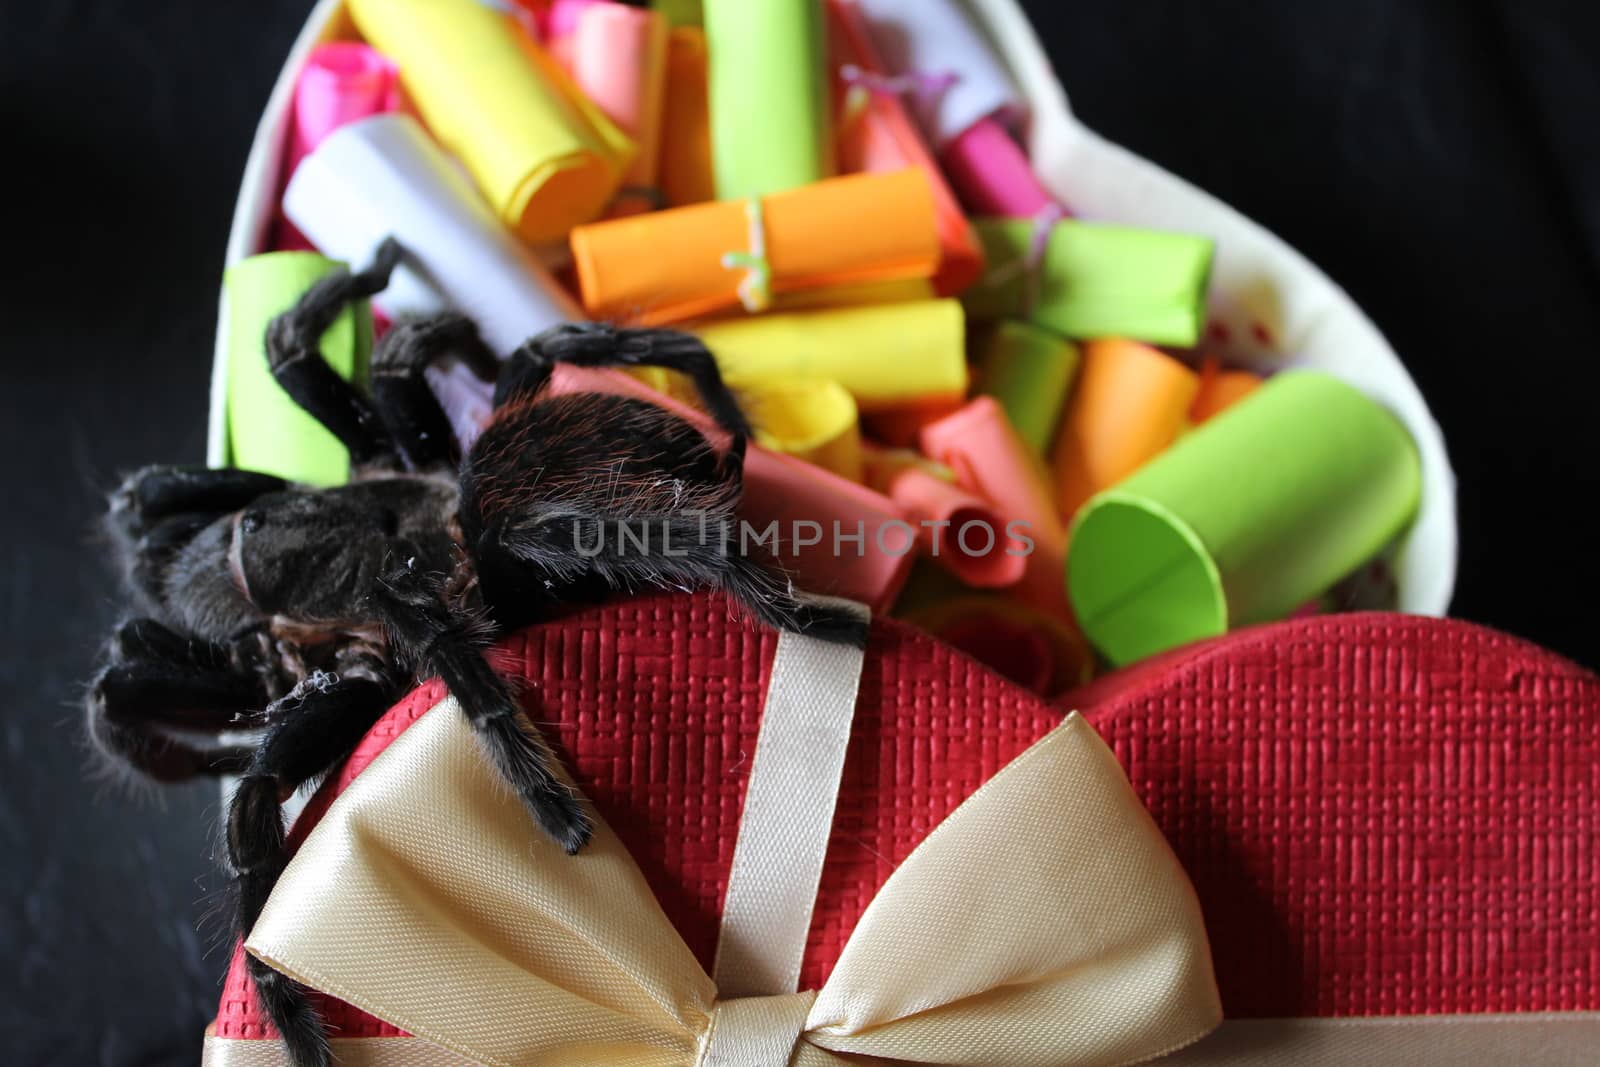 tarantula on a bright background of the box from under the brim gifts strewn with colored notes desires